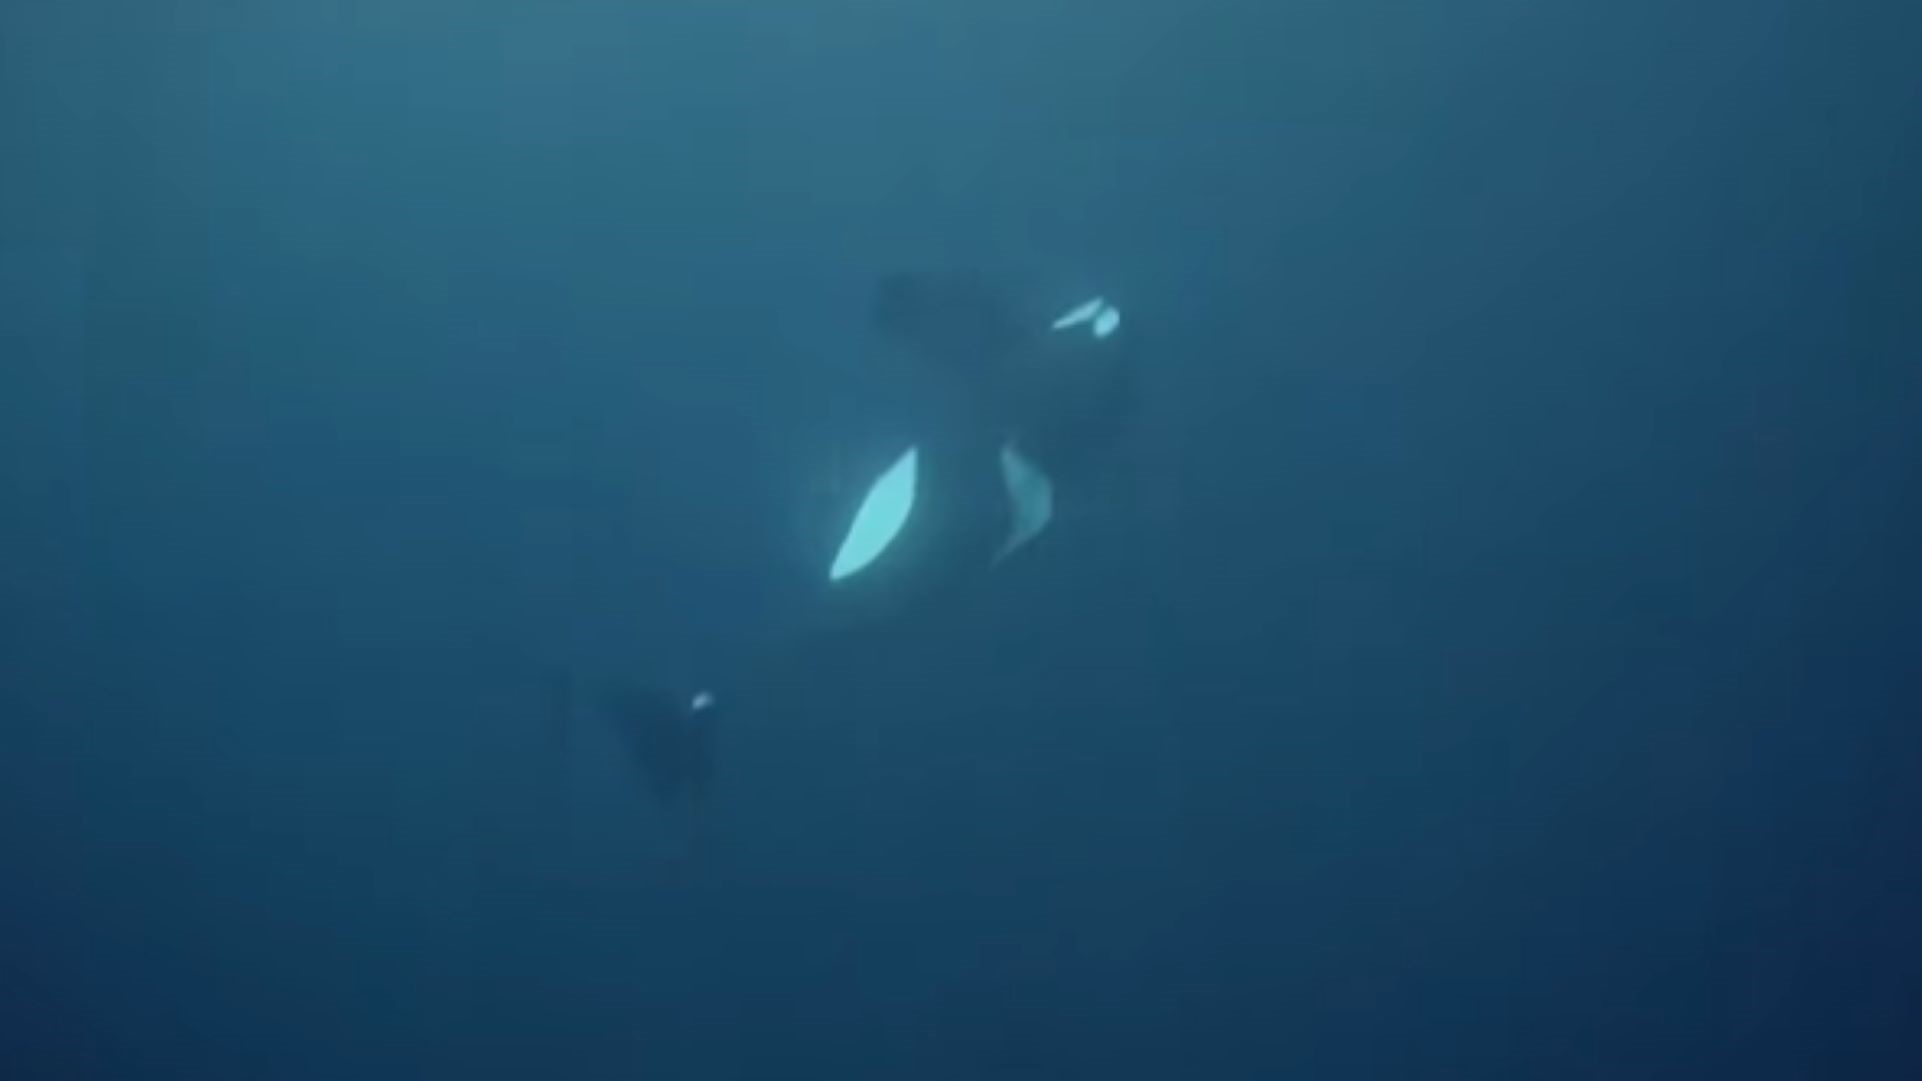 An orca sinks into the water depths in Norway.